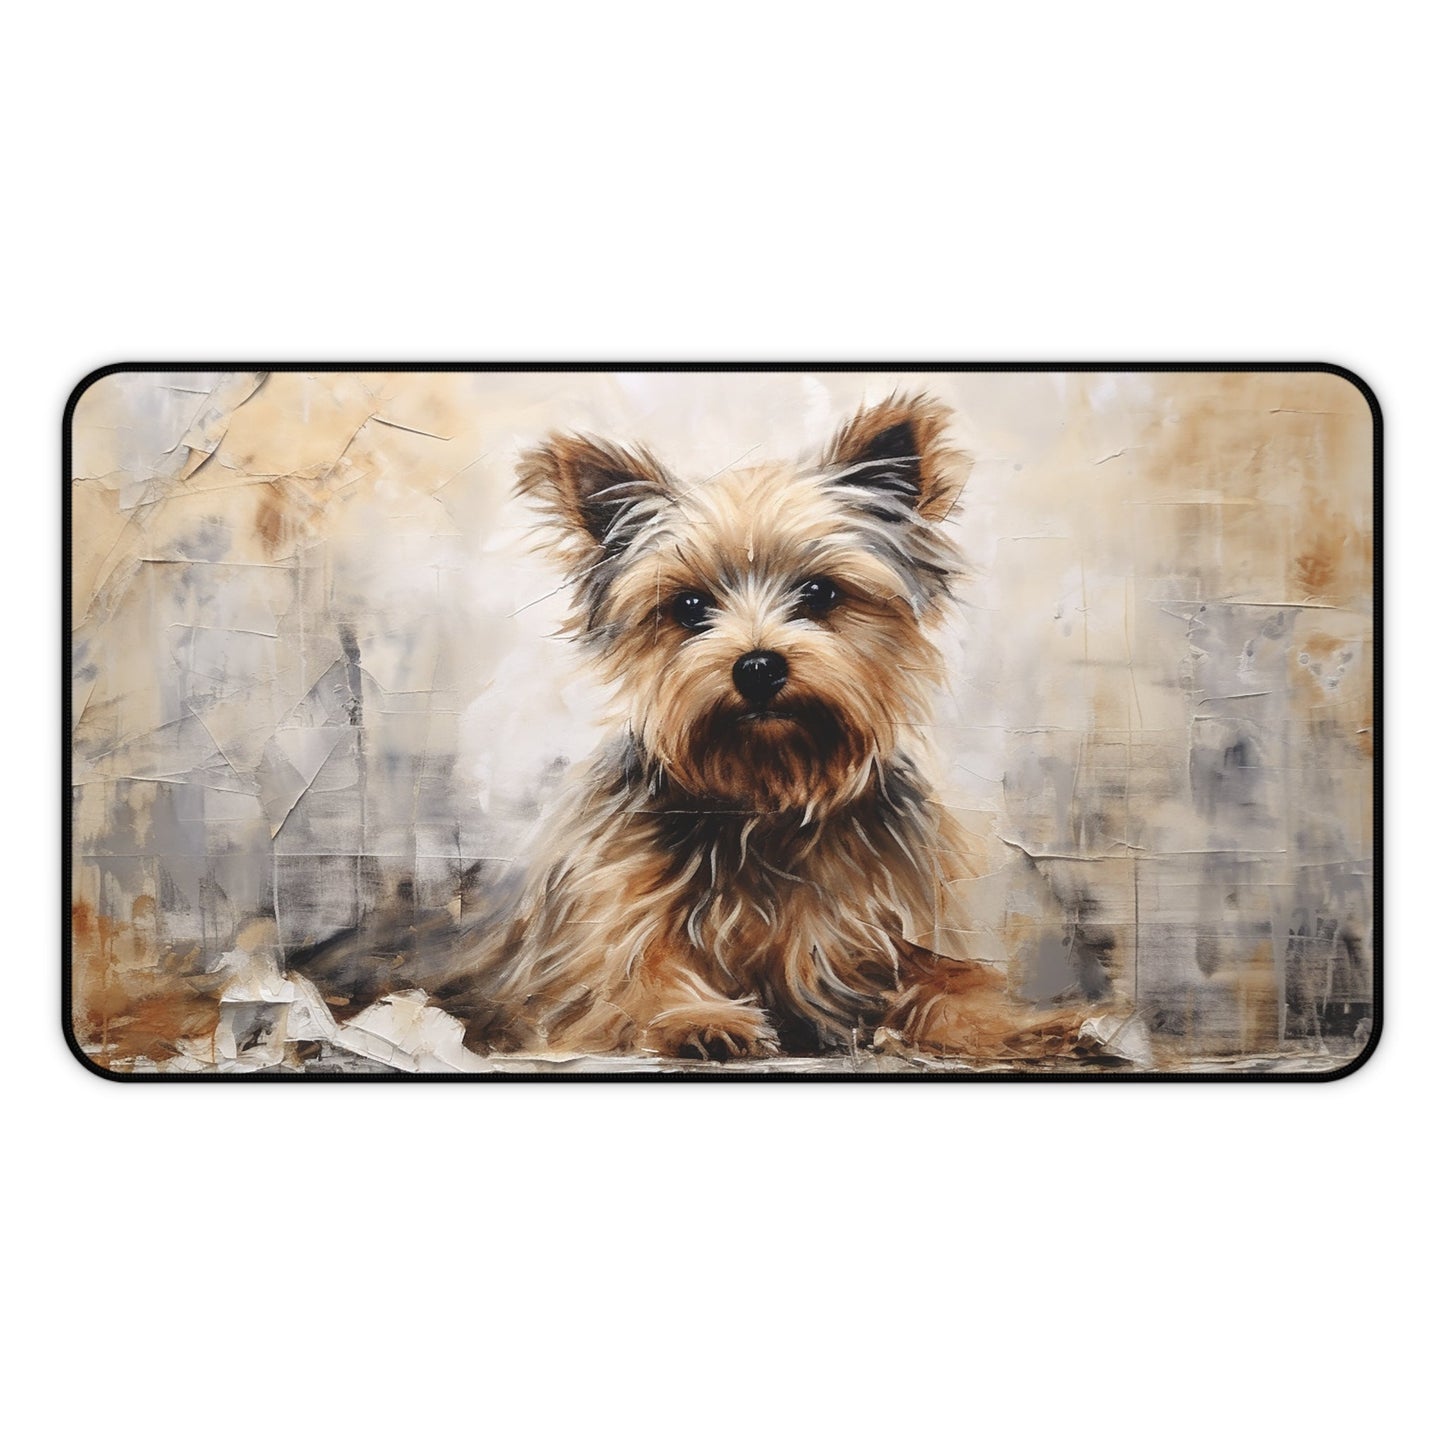 Cute Yorkie Large Mouse Pad, Part of Dog Art Collection Desk Mats - FlooredByArt